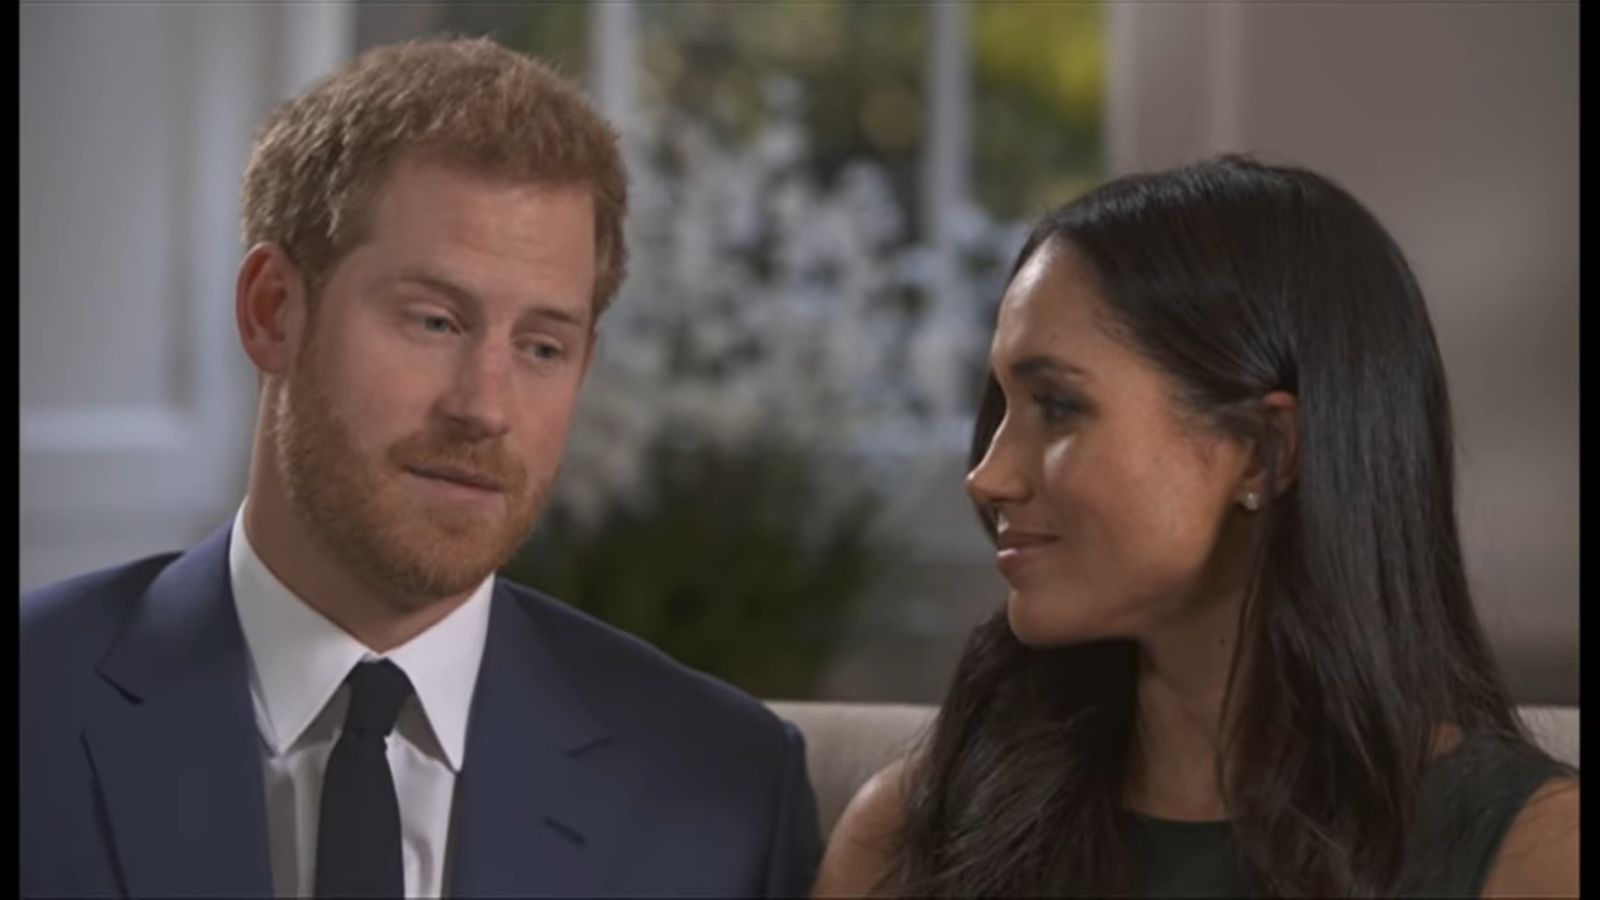 meghan-markle-shock-duchess-reportedly-intent-on-appearing-beside-queen-elizabeth-at-platinum-jubilee-was-asked-not-to-talk-about-prince-harry-but-refused-to-listen